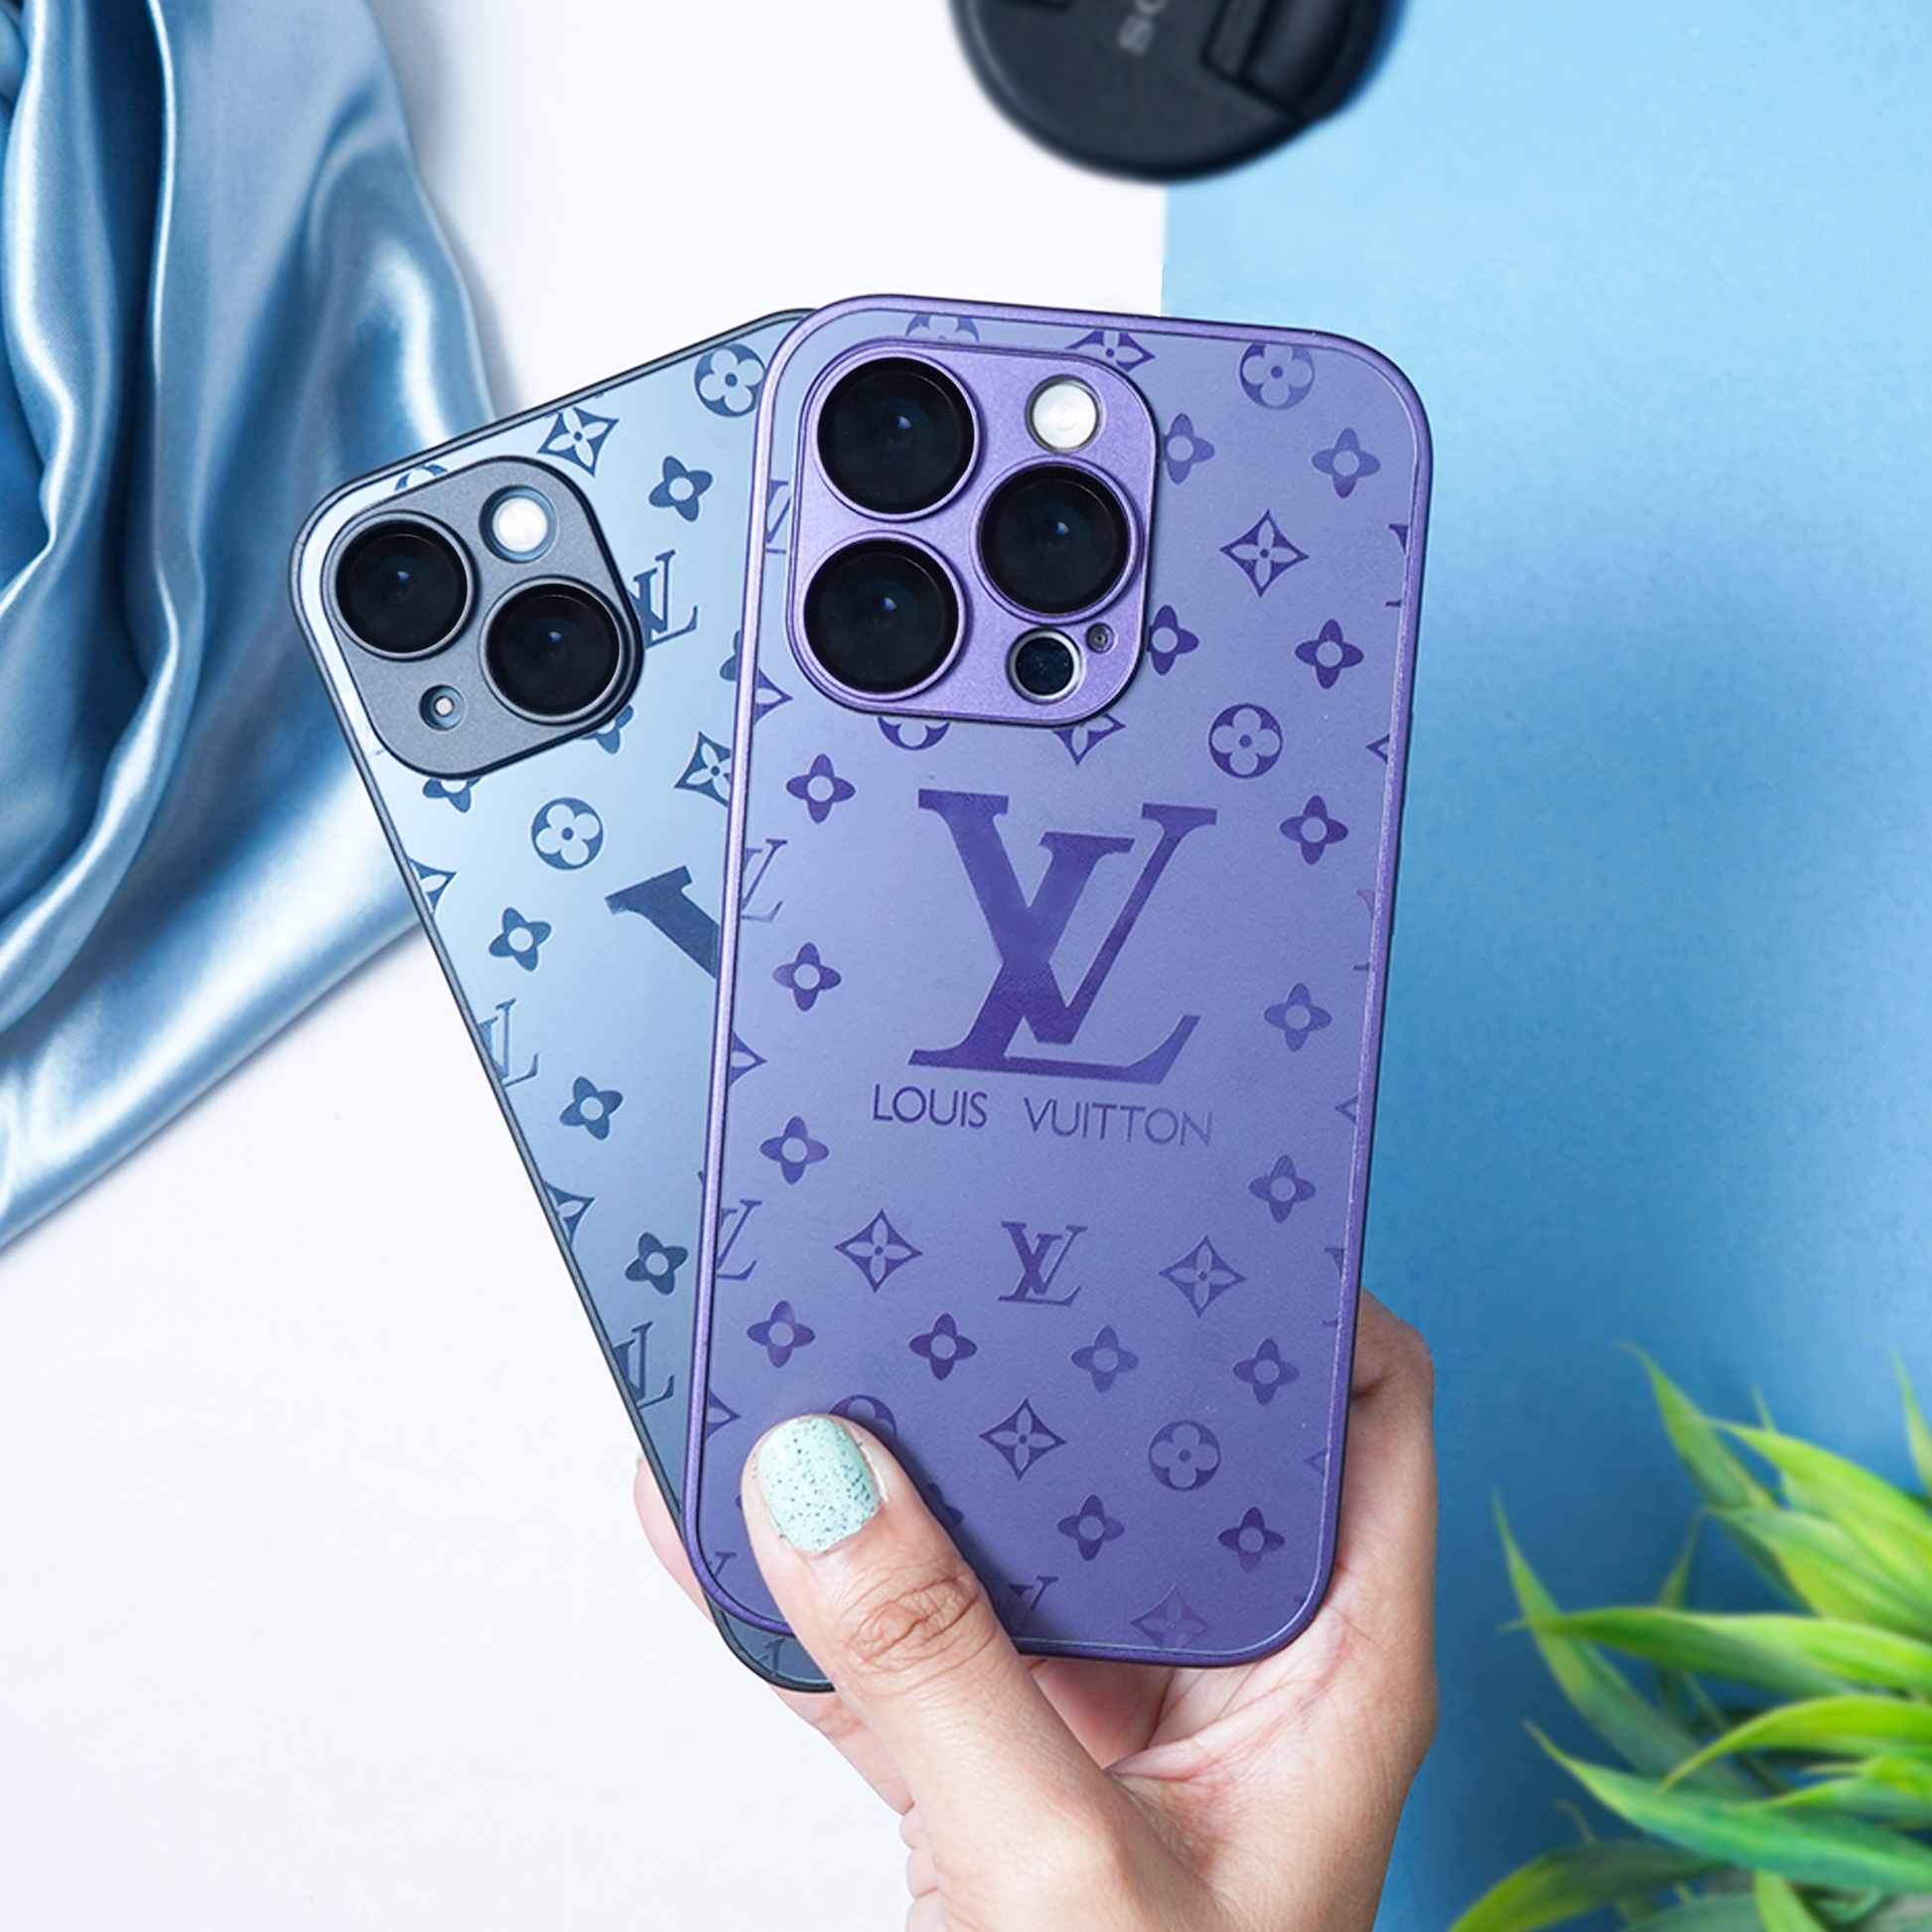 You can buy seven iPhones for the price of this Louis Vuitton